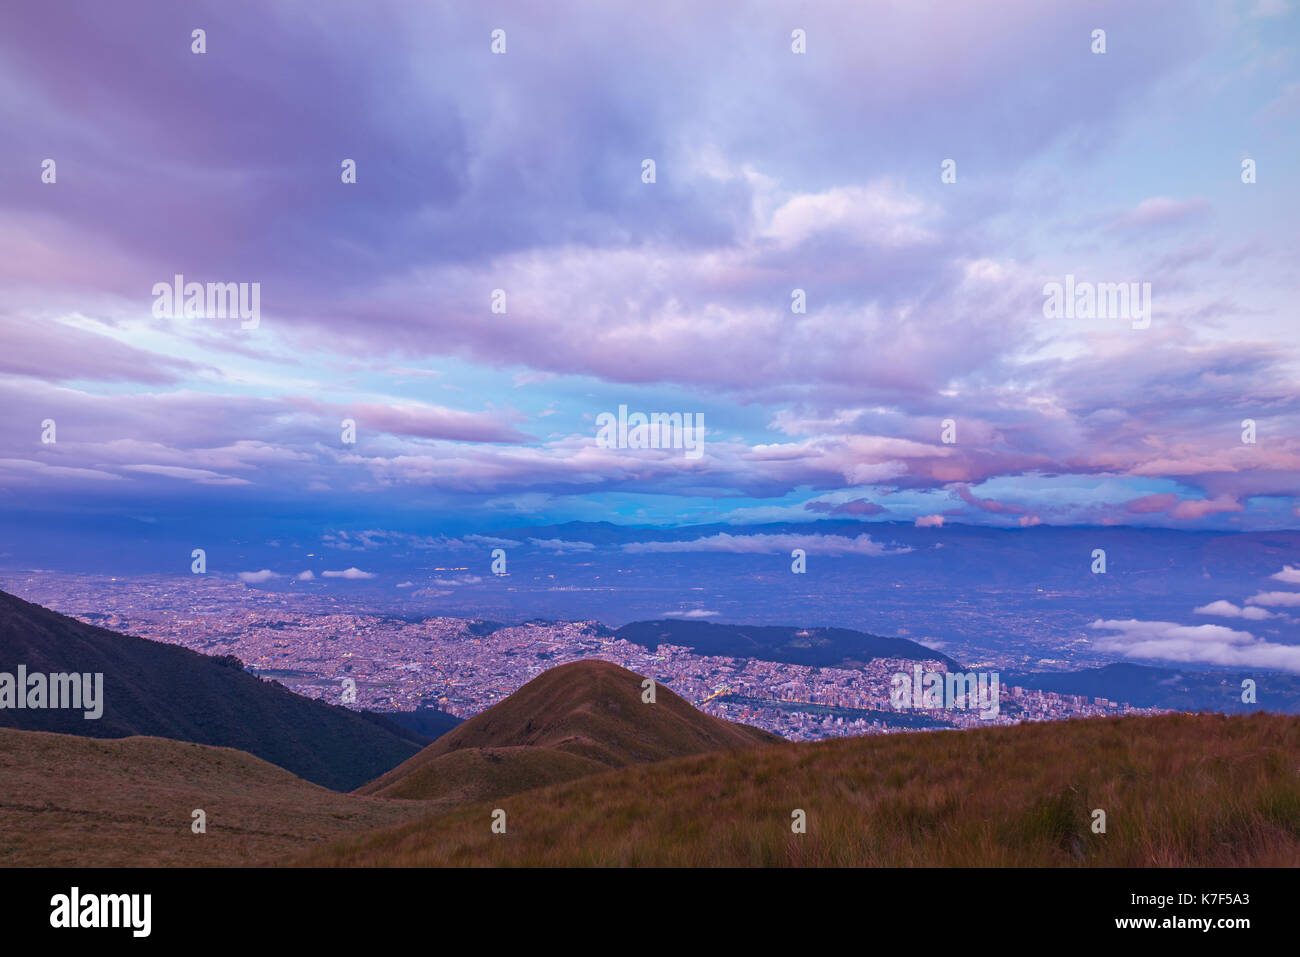 The skyline of Quito city at twilight with a long exposure and aerial view photograph seen from the active Pichincha volcano, Ecuador, Latin America. Stock Photo